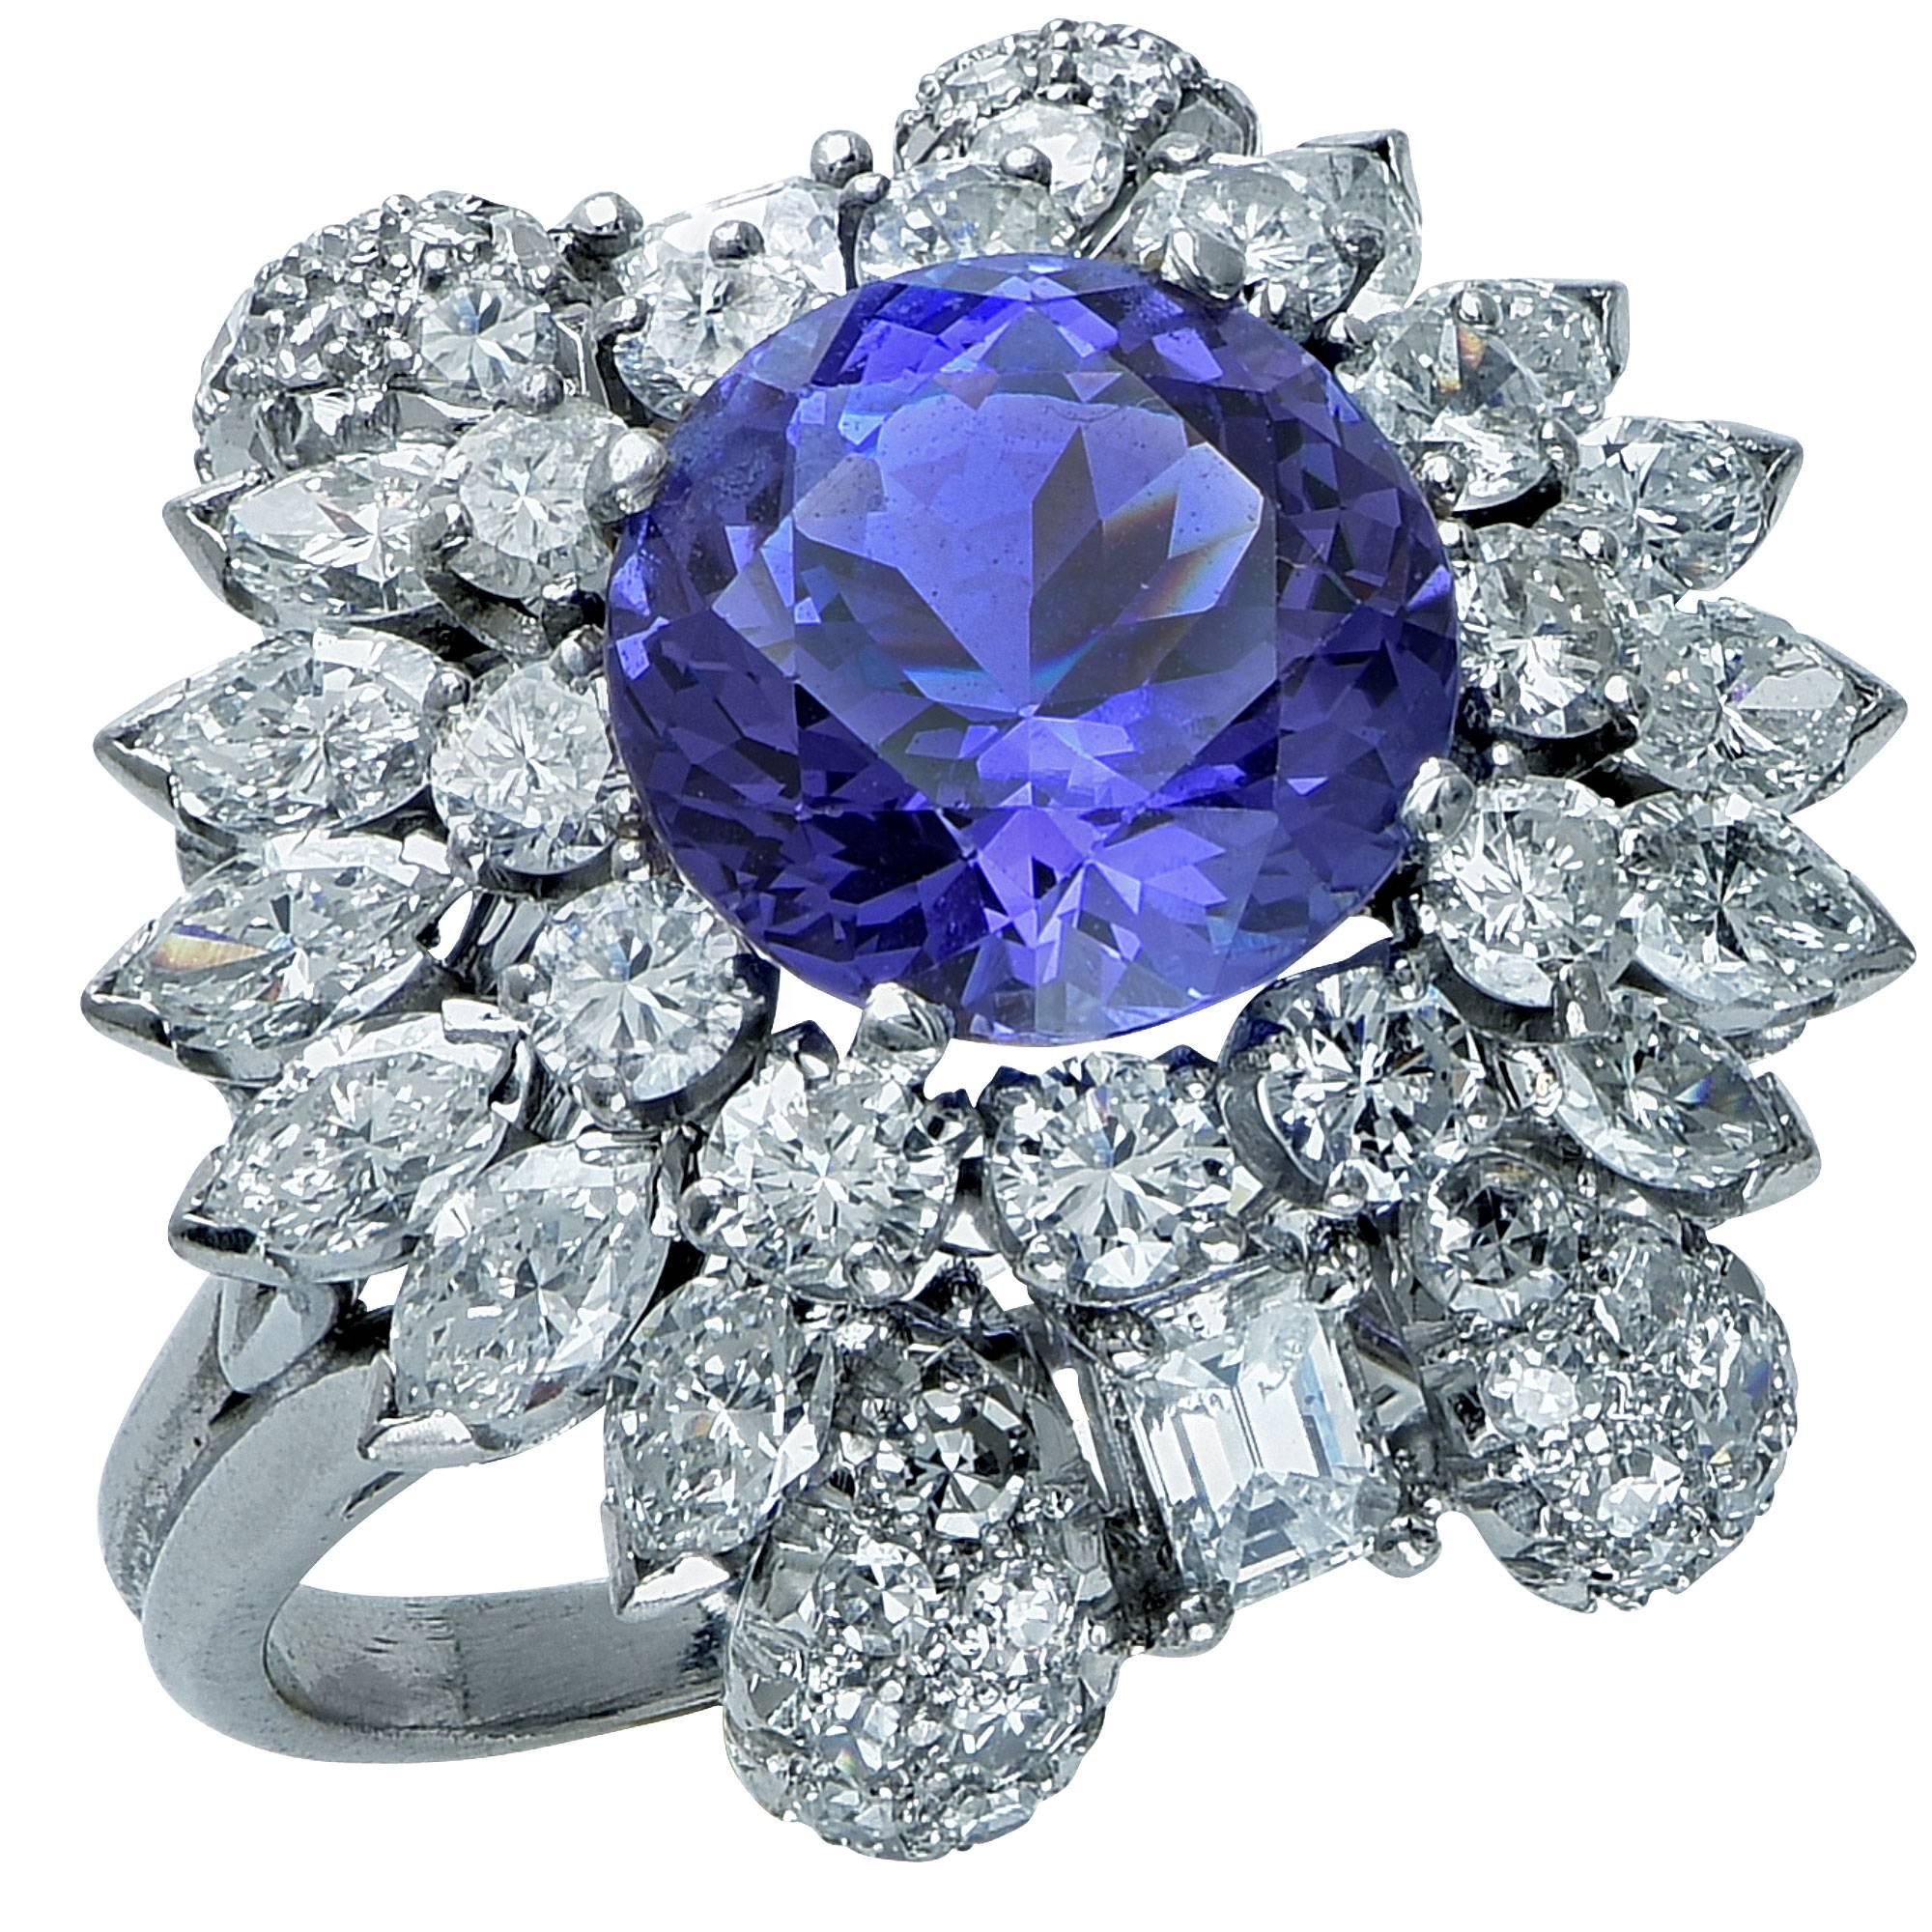 Platinum ring featuring a round cut tanzanite weighing approximately 4.90cts accented by 58 round, marquise and emerald cut diamonds weighing approximately 3.60cts total, G color, VS-SI clarity.

Ring size: 6 (can be sized up or down)
Metal